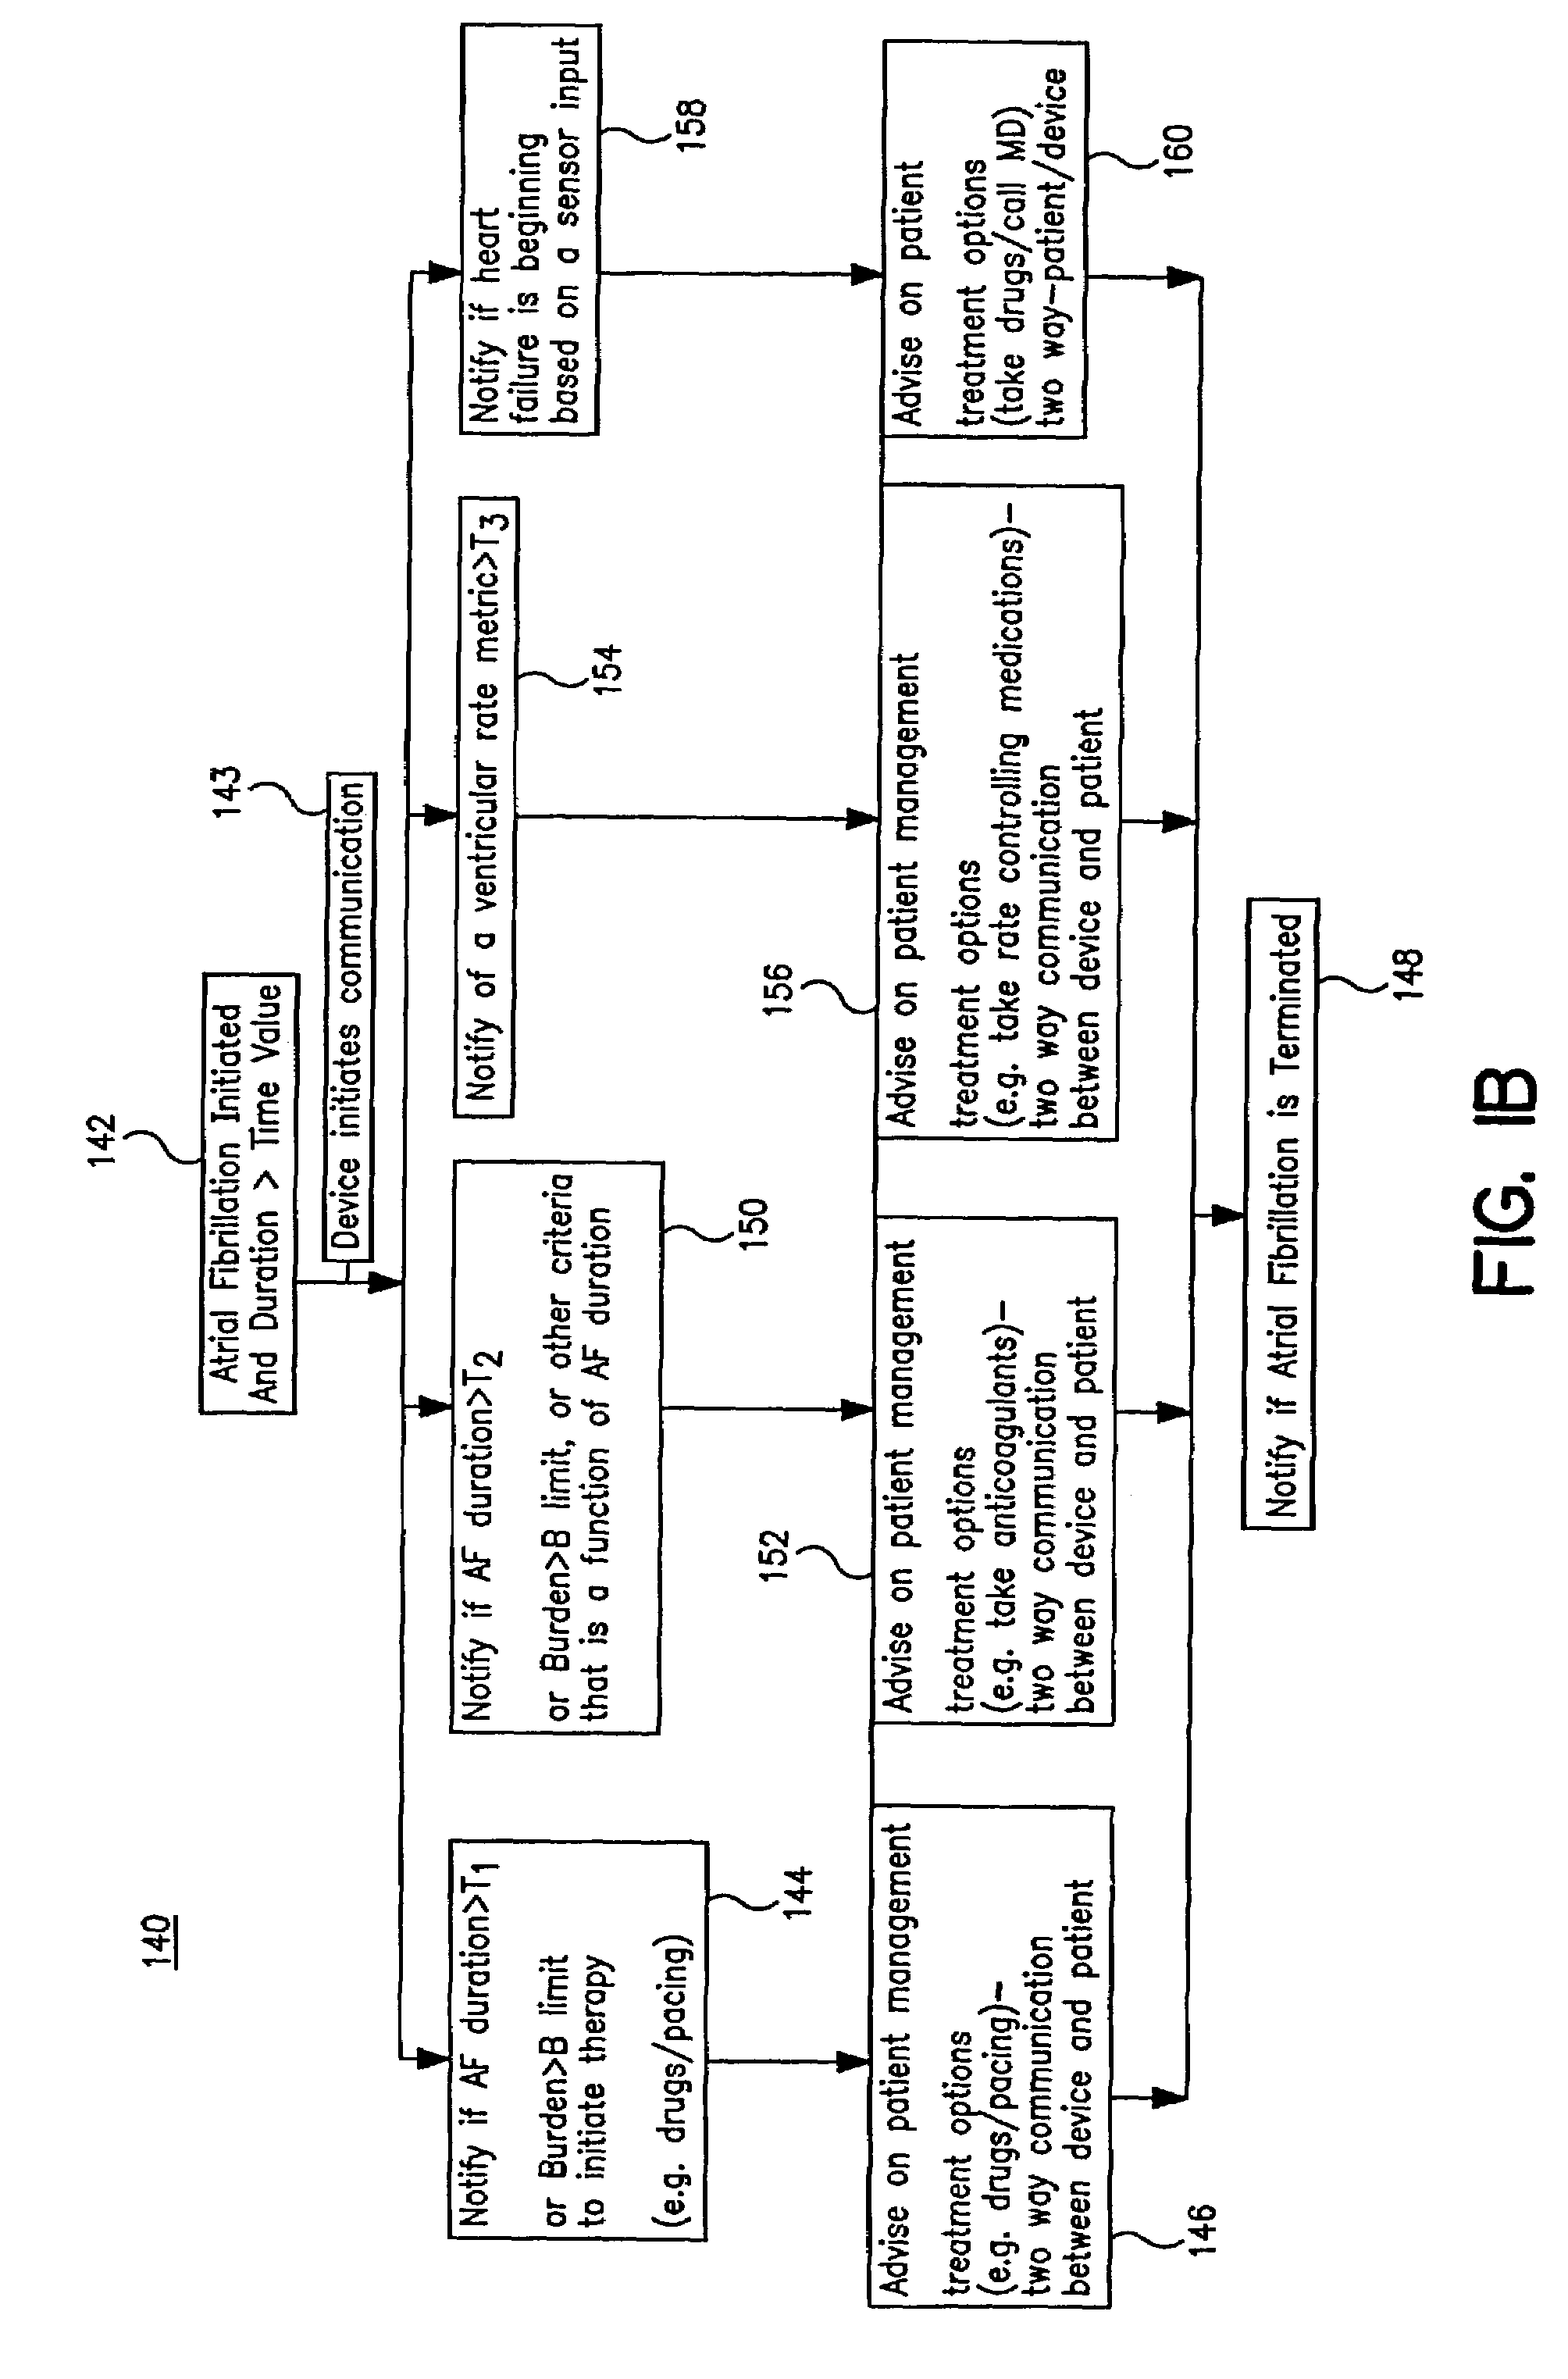 Method and a system for using implanted medical device data for accessing therapies